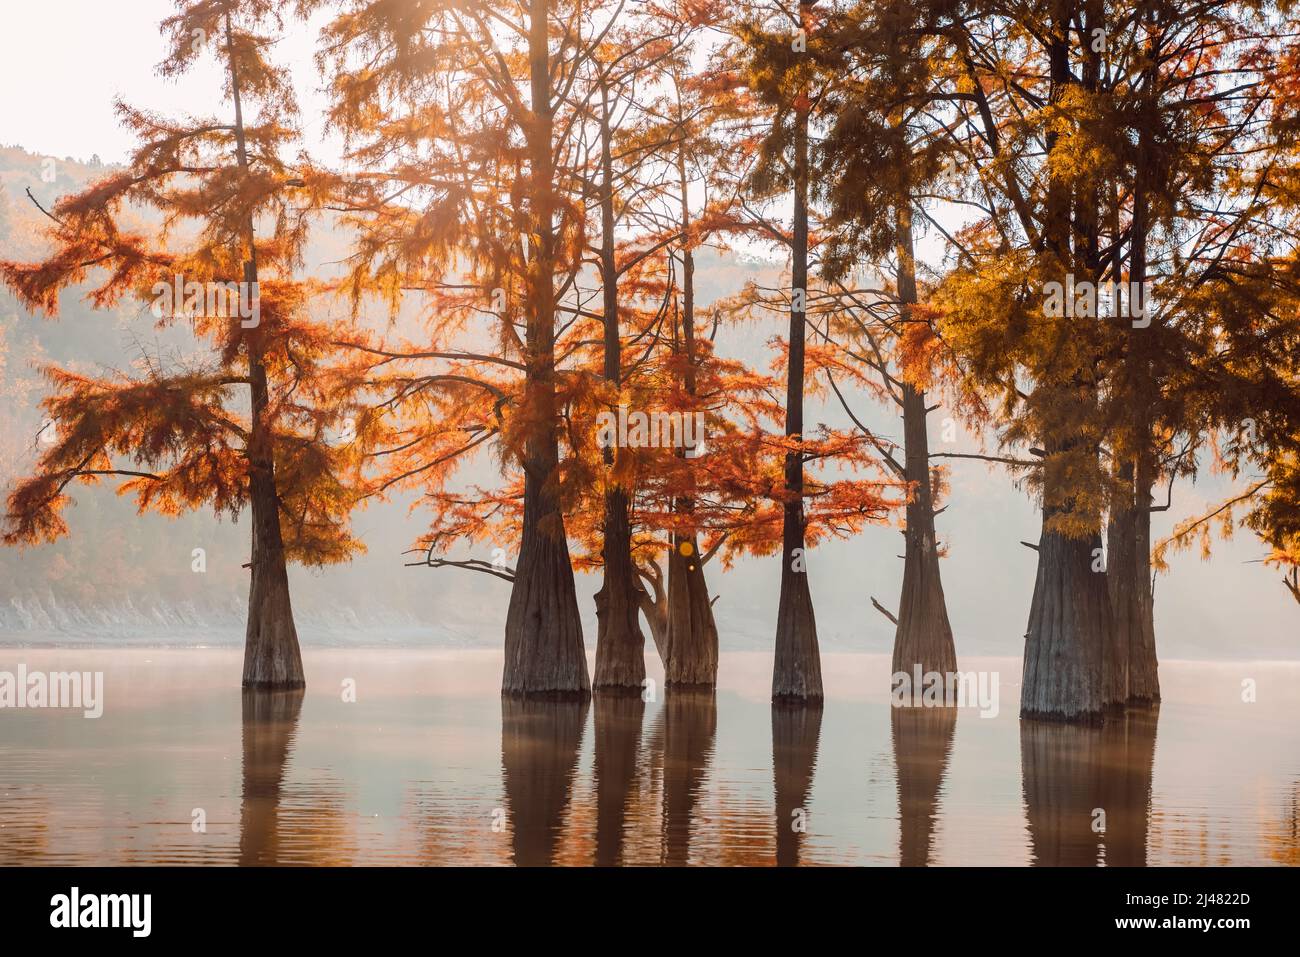 Taxodium distichum or swamp cypresses and glassy lake with reflection. Stock Photo